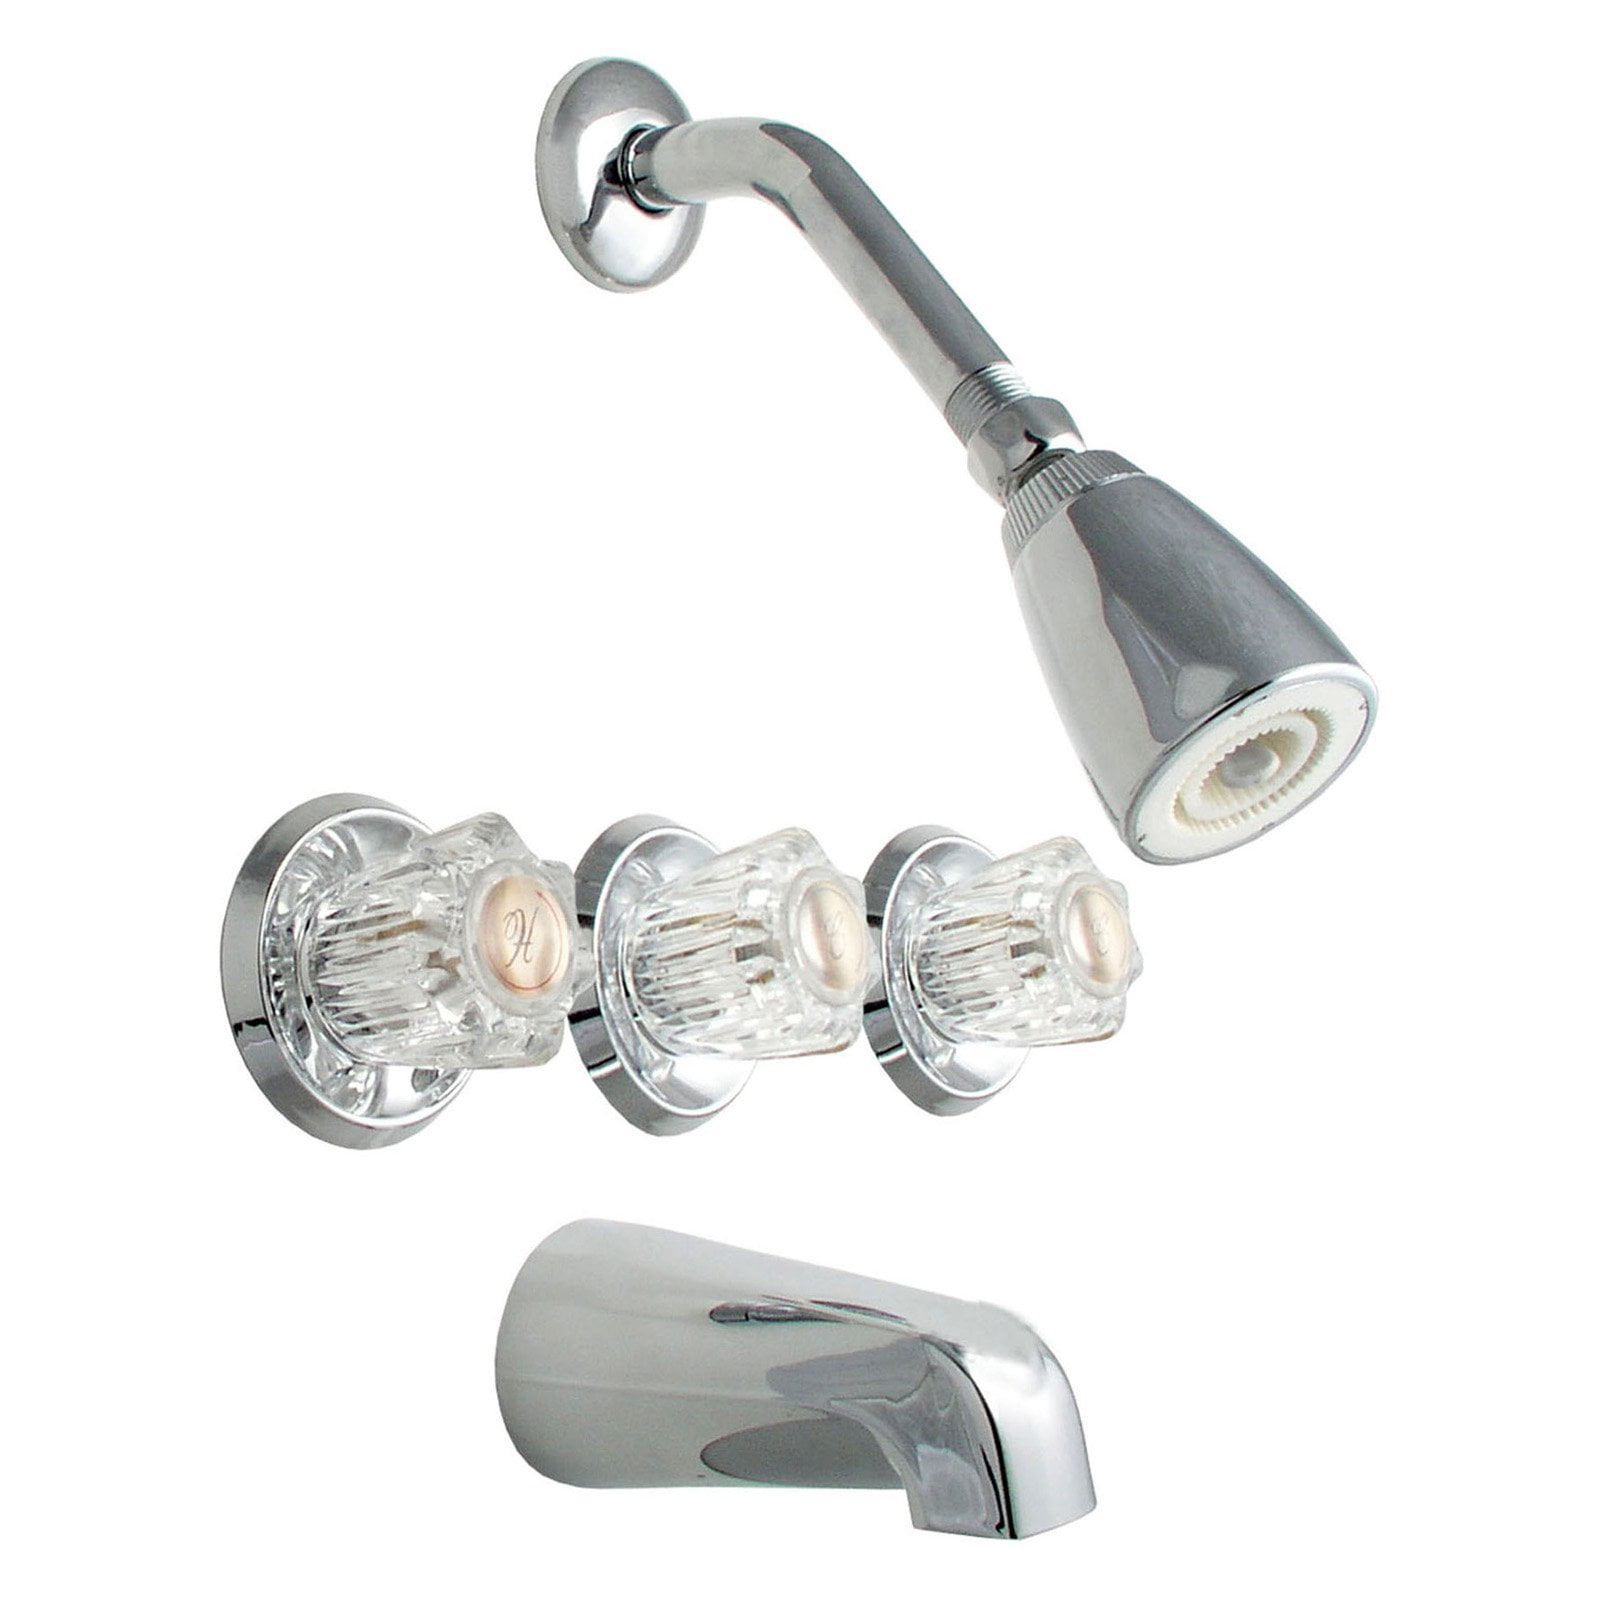 LDR 011 8500 3 Handle Tub and Shower Faucet Walmart